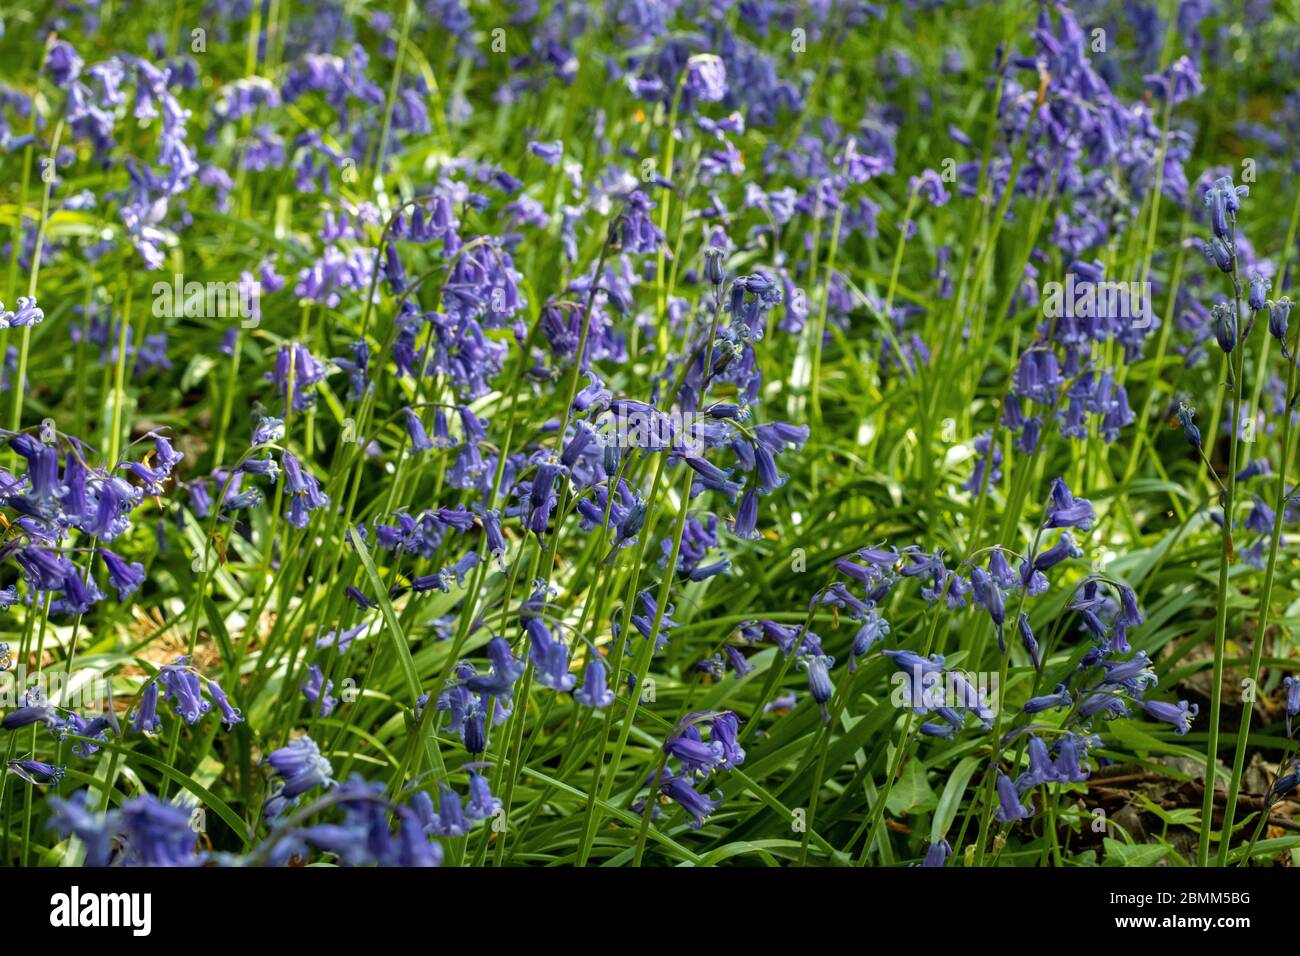 Part of a carpet of bluebells in an English woodland in West Sussex. Stock Photo